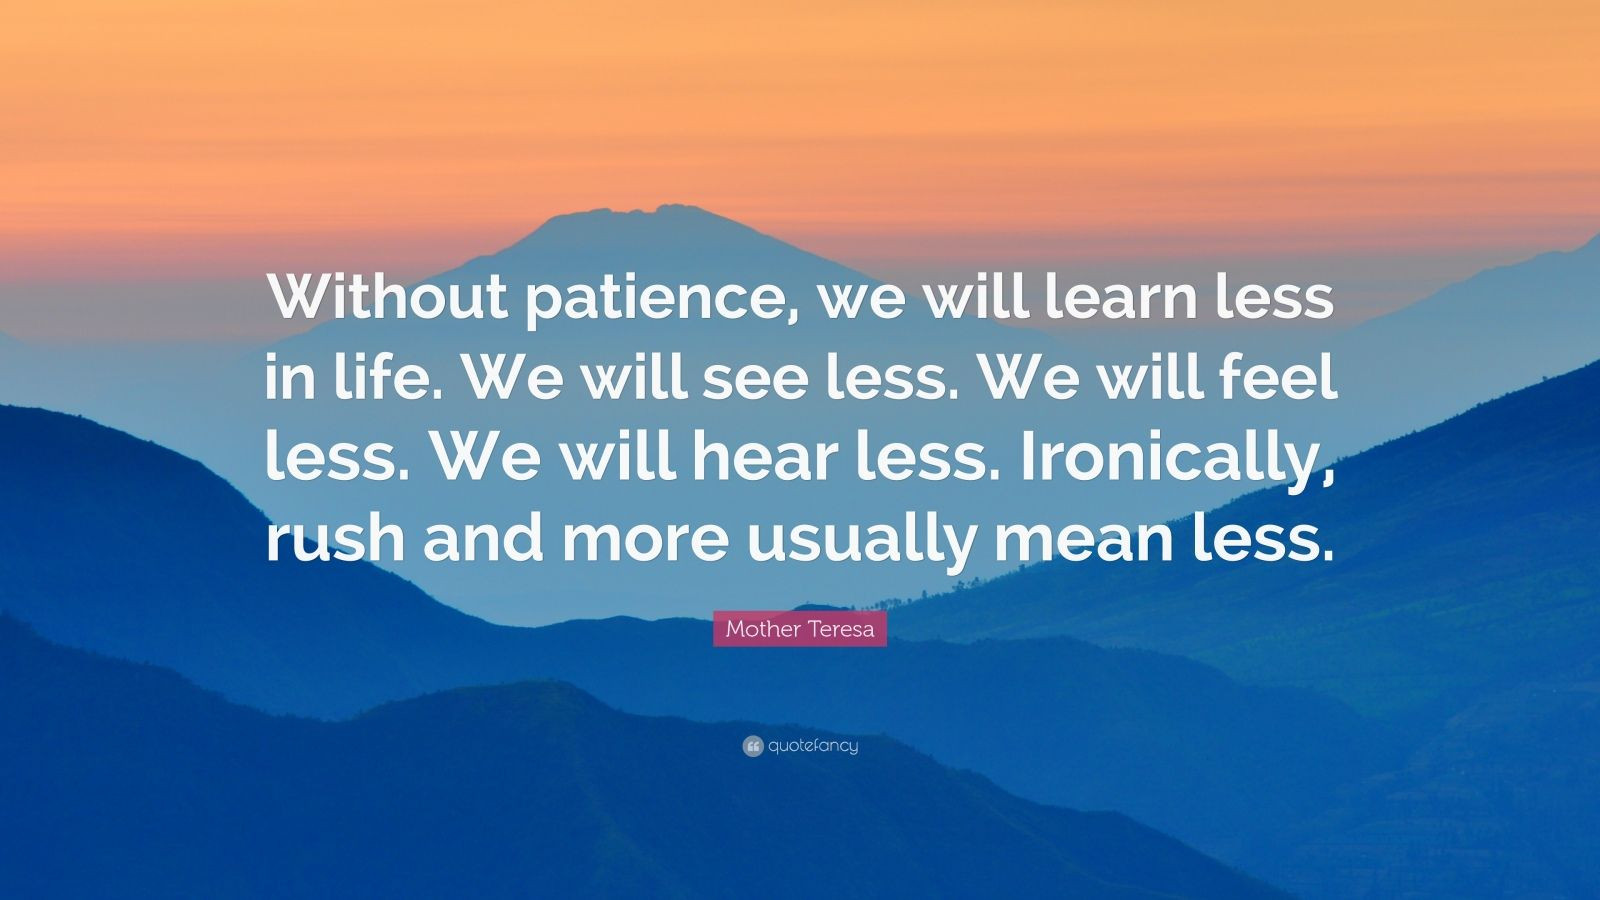 Inspirational Women'S Quotes
 Mother Teresa Quote “Without patience we will learn less